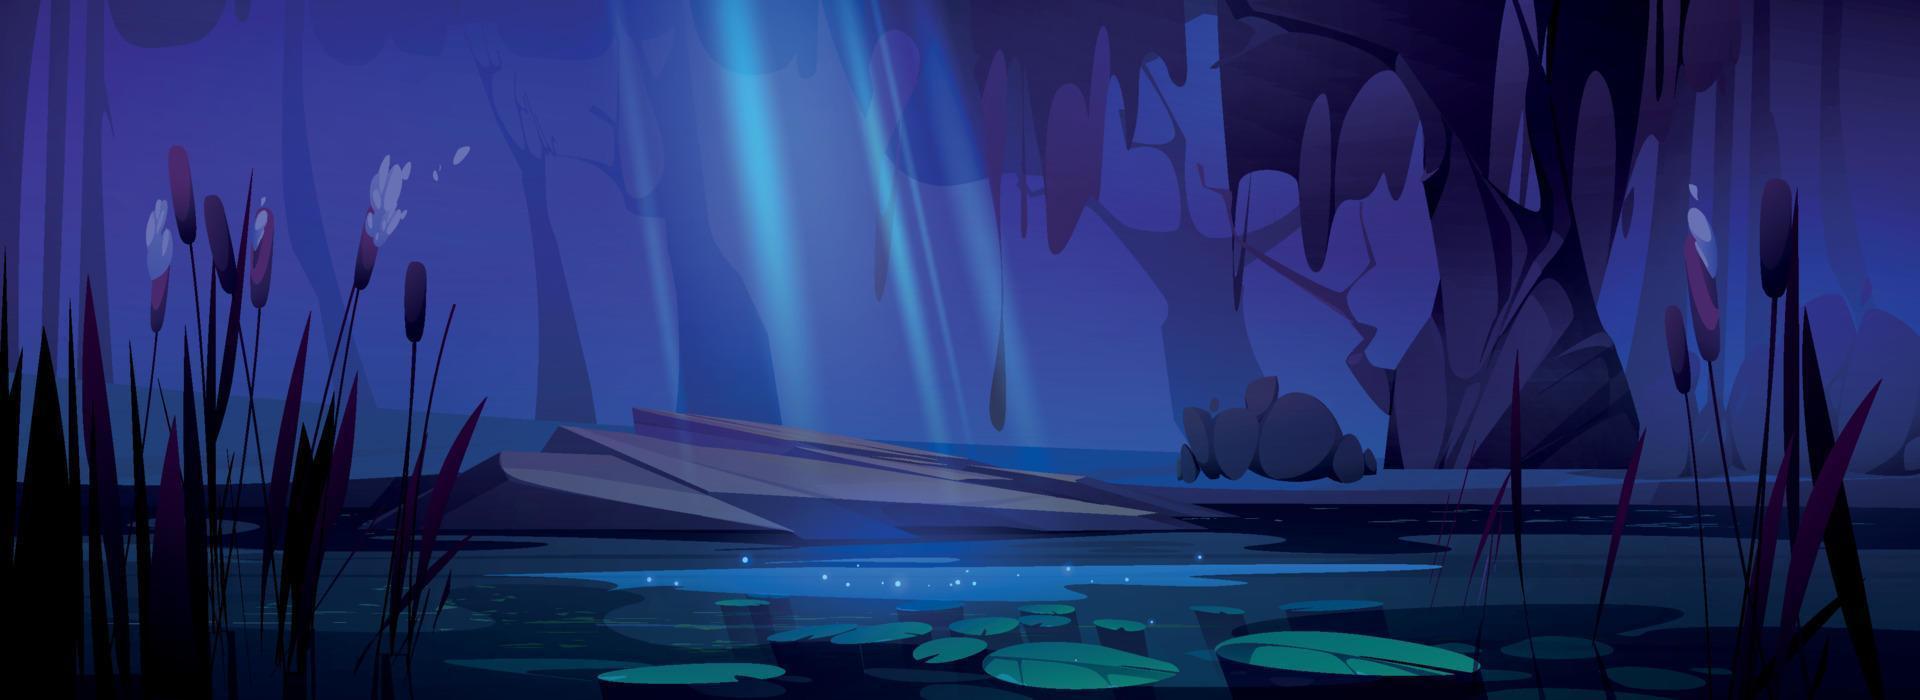 Cartoon pond with cattails at night vector